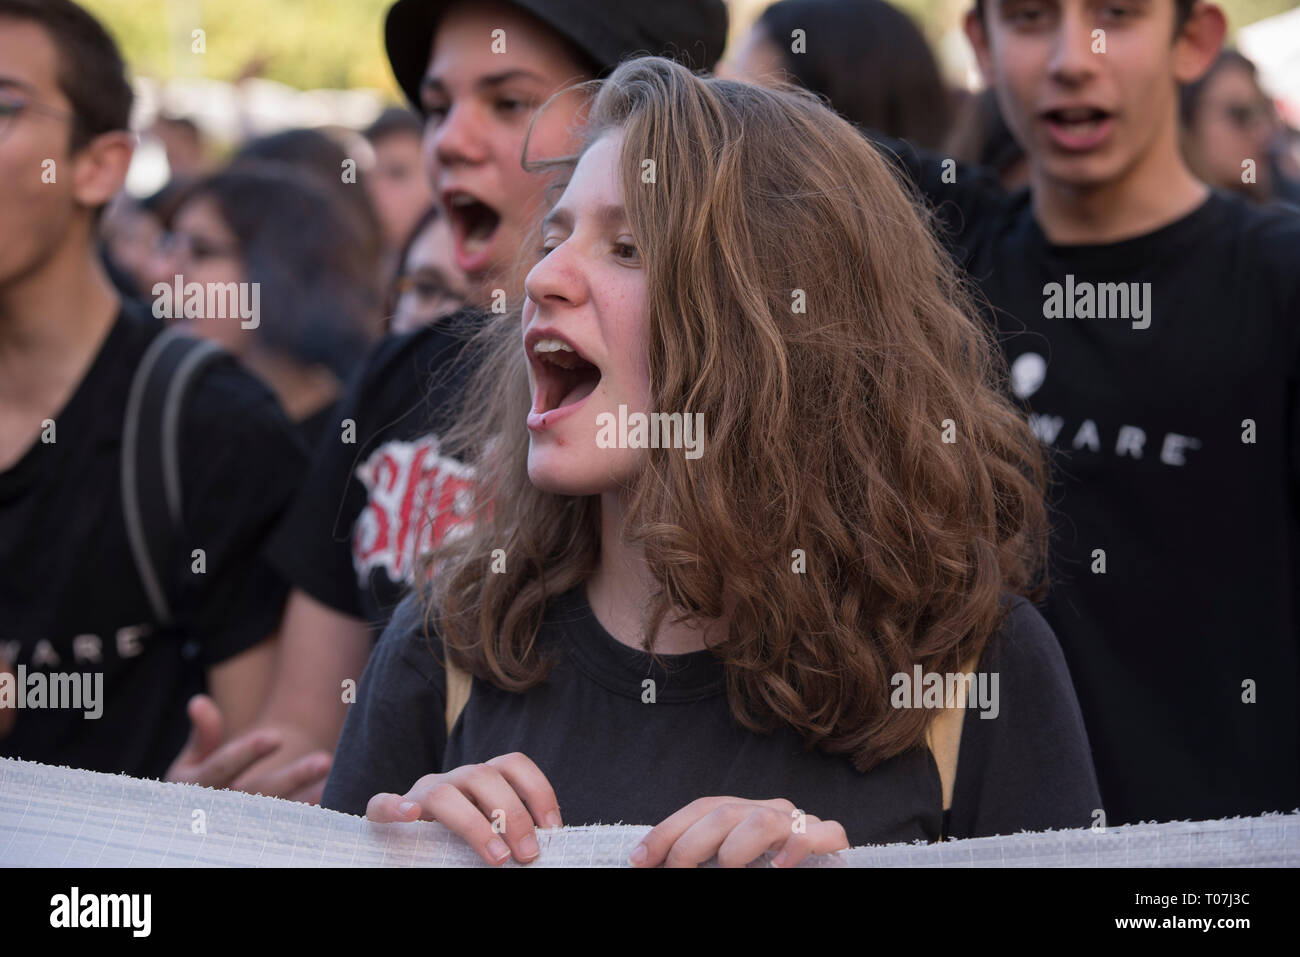 Students rally holding banners and shout slogans against the government. A few thousands high school students took to the streets to demonstrate against upcoming reforms in education, which they claim will drive them to seek for paid supplementary education putting an additional financial burden to their parents.© Nikolas Georgiou / Alamy Live News Stock Photo